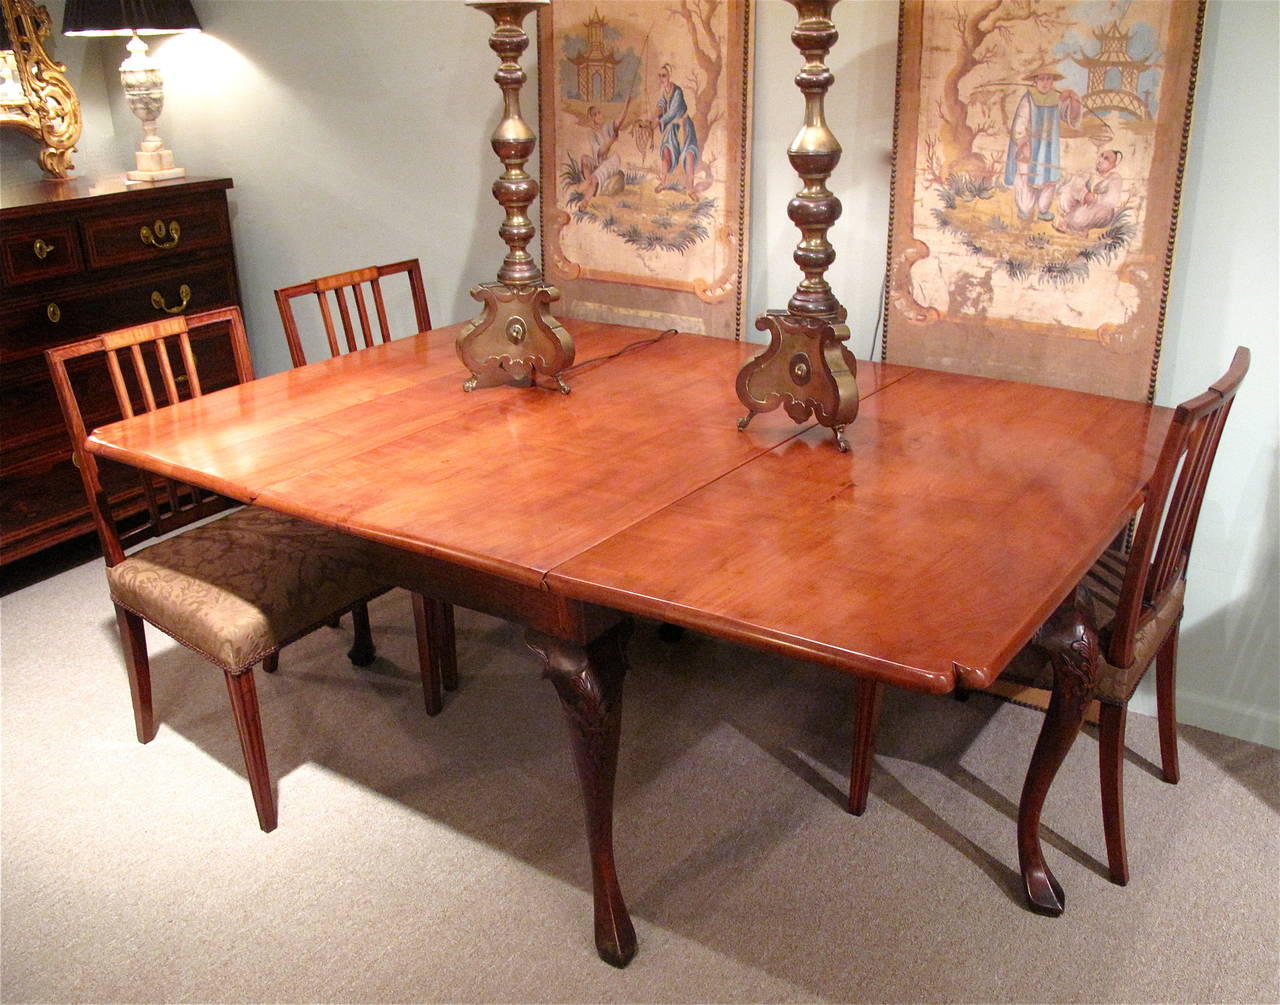 A rare English fruitwood dining table, ca. 1740, with a shaped top of light cherry, the legs of bold cabriole form, ending in squared and pointed pad feet. Each knee is handsomely carved with a symmetrical acanthus spray arranged like a fleur de